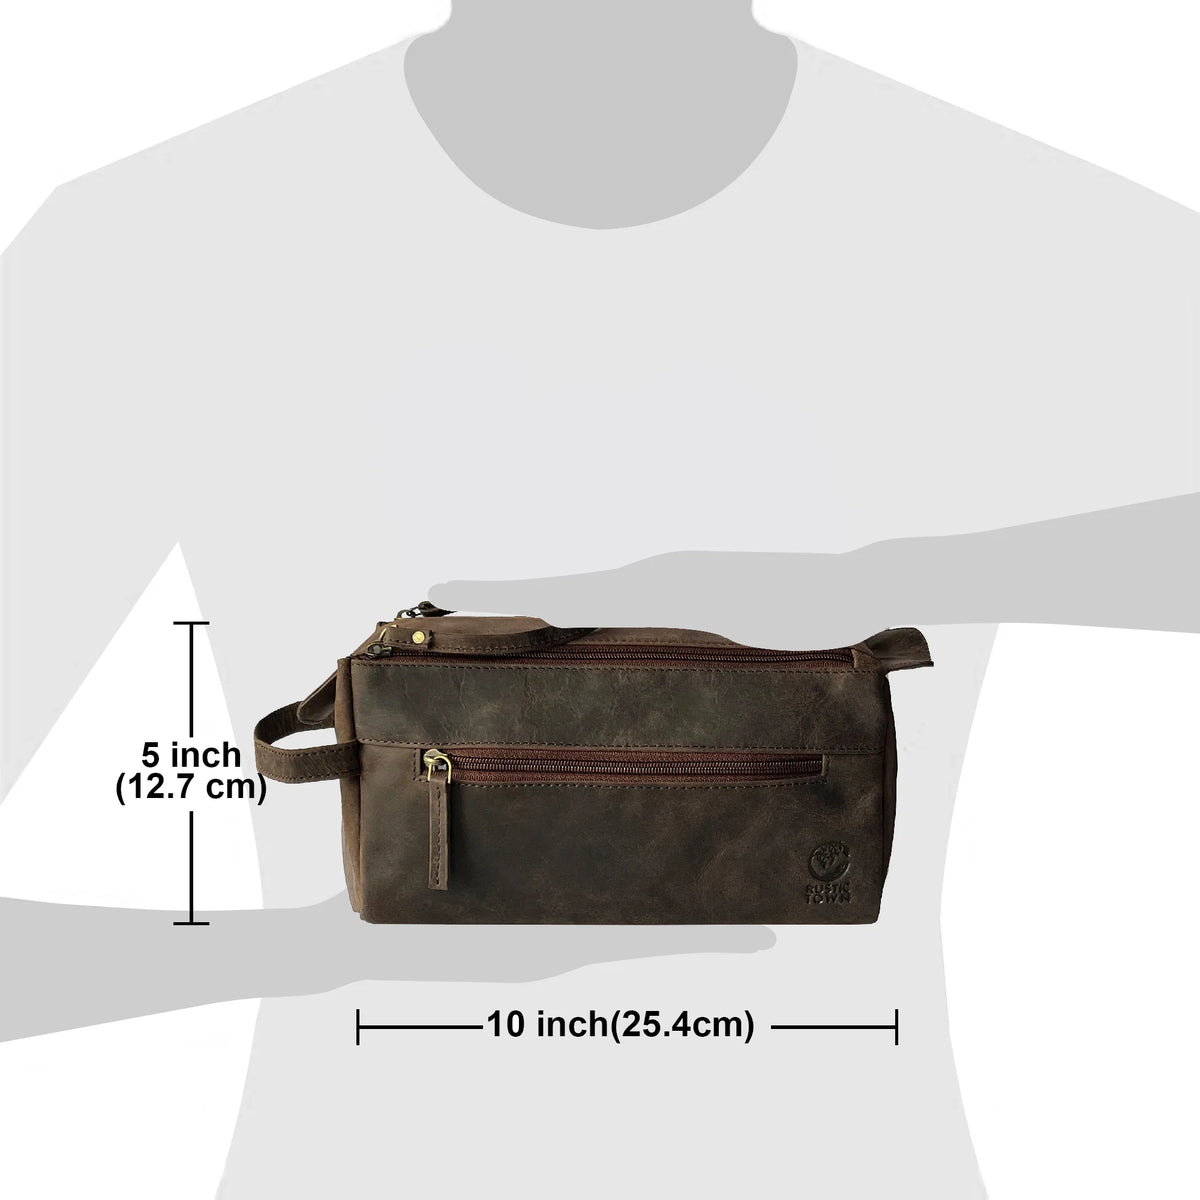 Rustic Town Men's Leather Hand Pouch